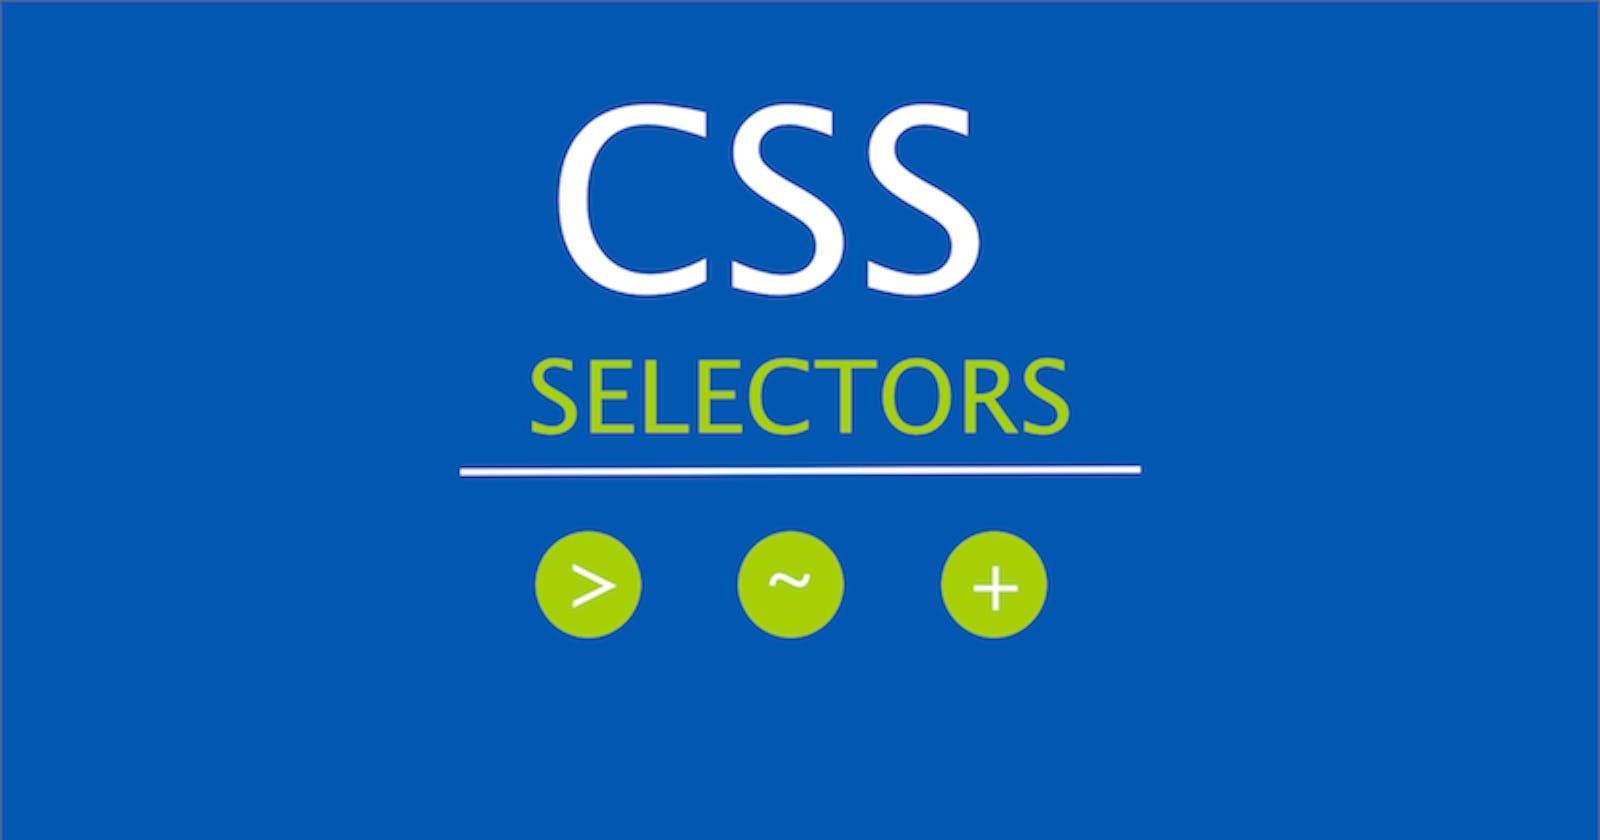 A Comprehensive Guide On CSS Selectors